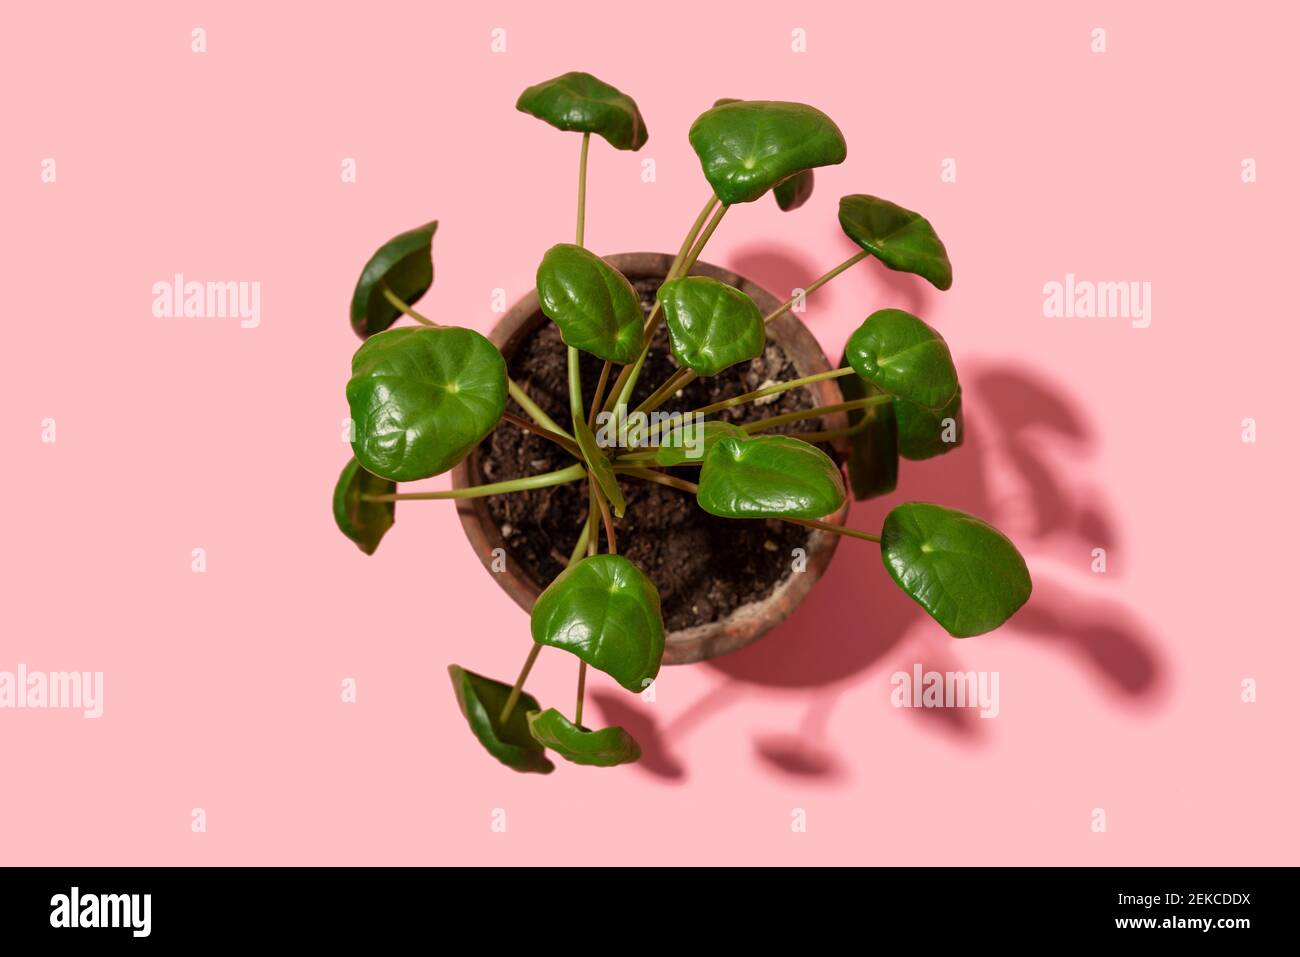 Studio shot of potted Chinese money plant (Pilea peperomioides) Stock Photo